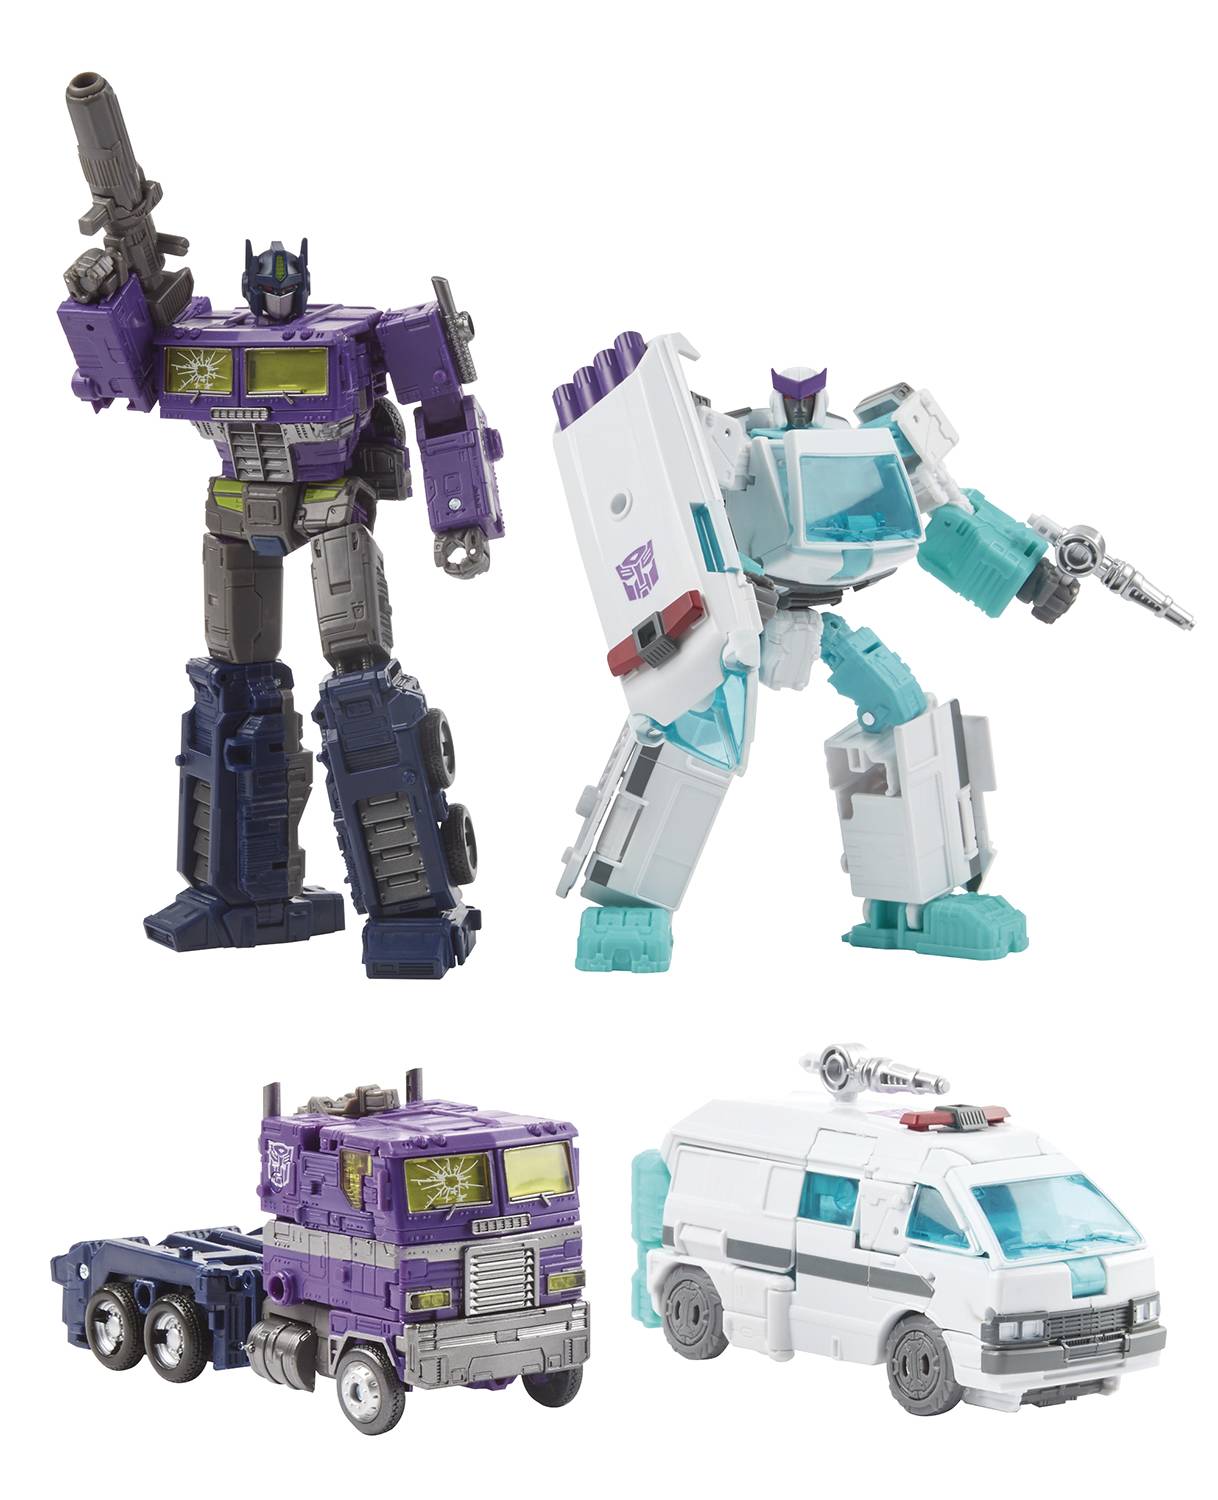 Transformers Generations Selects Shattered Glass Optimus Prime & Ratchet